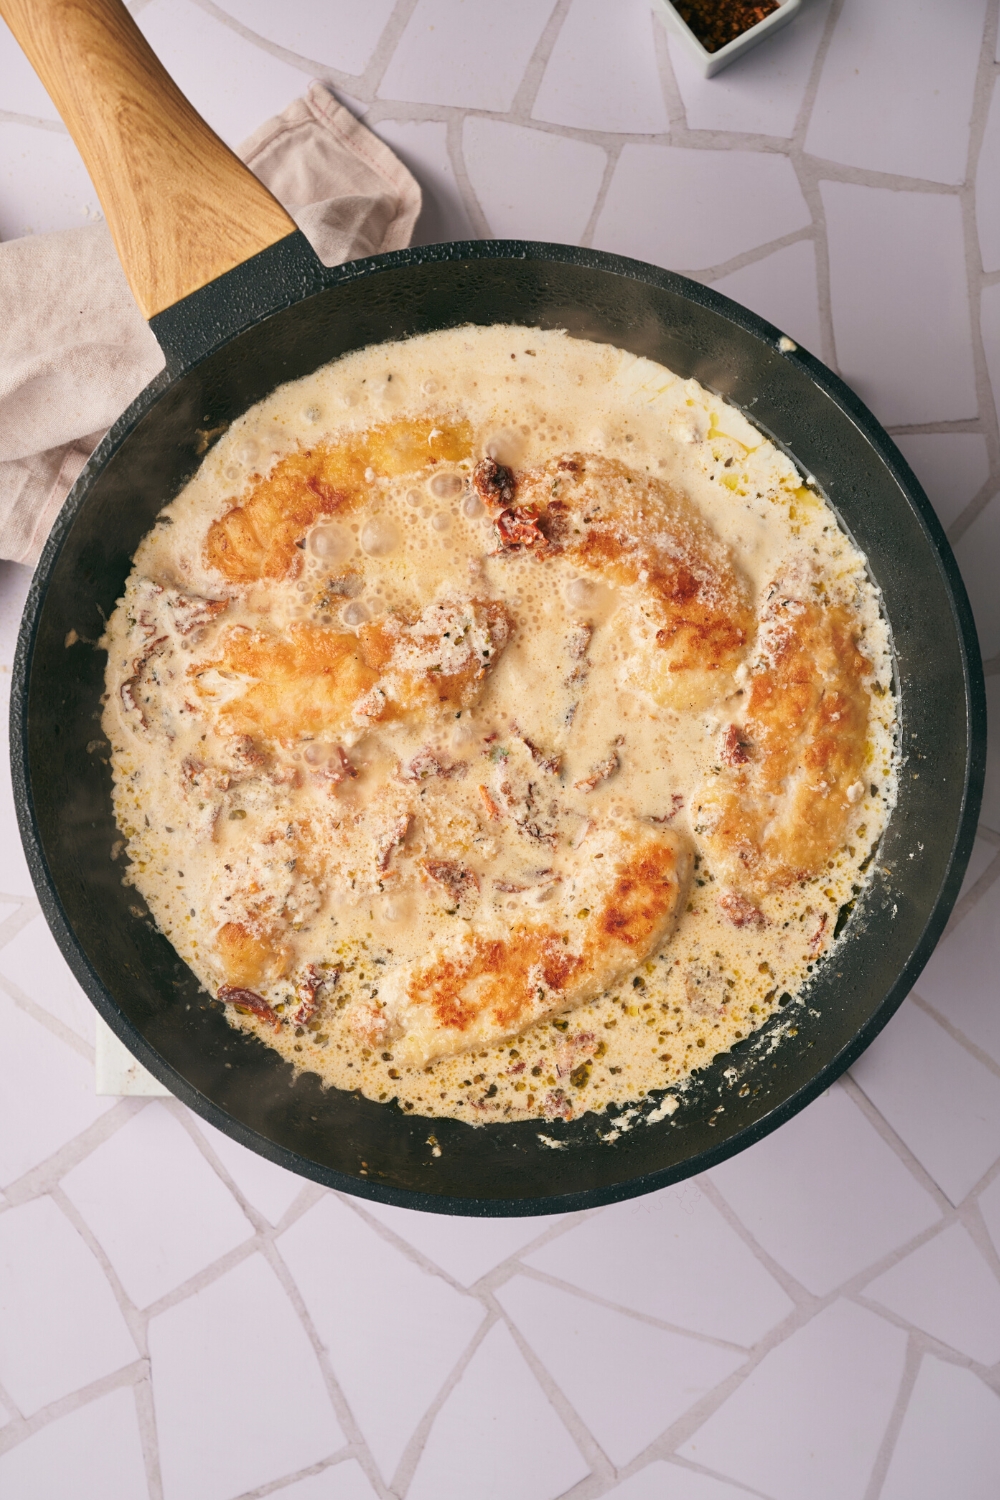 A few pieces of chicken cooking in a cream sauce in a skillet.